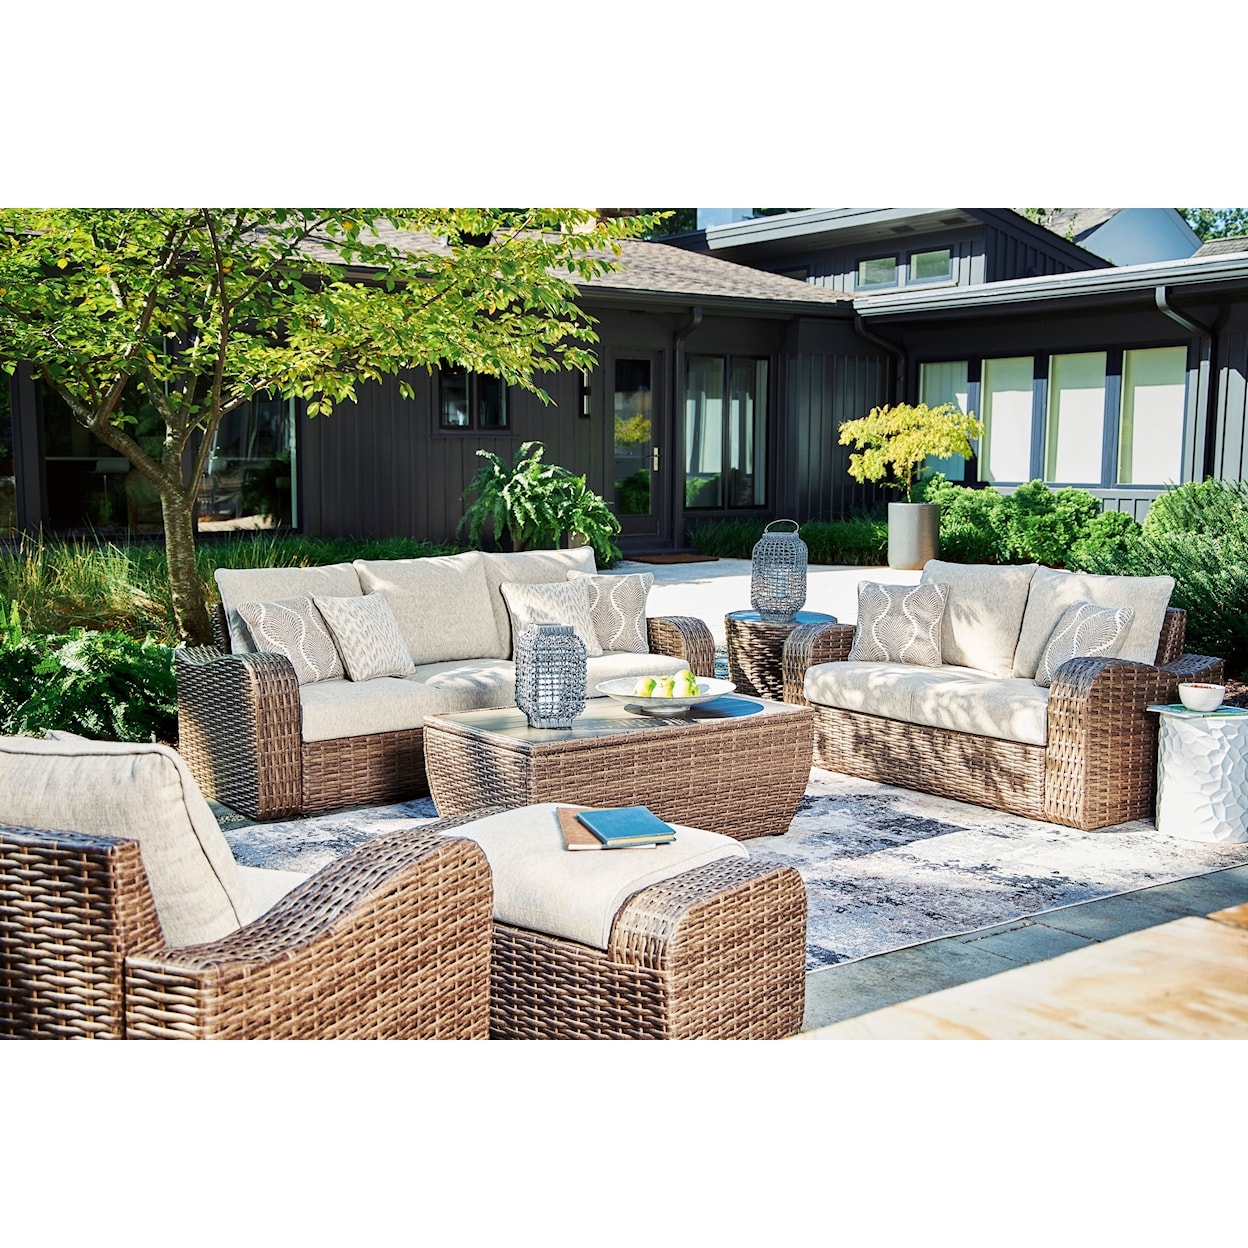 Ashley Furniture Signature Design Sandy Bloom Outdoor Loveseat with Cushion